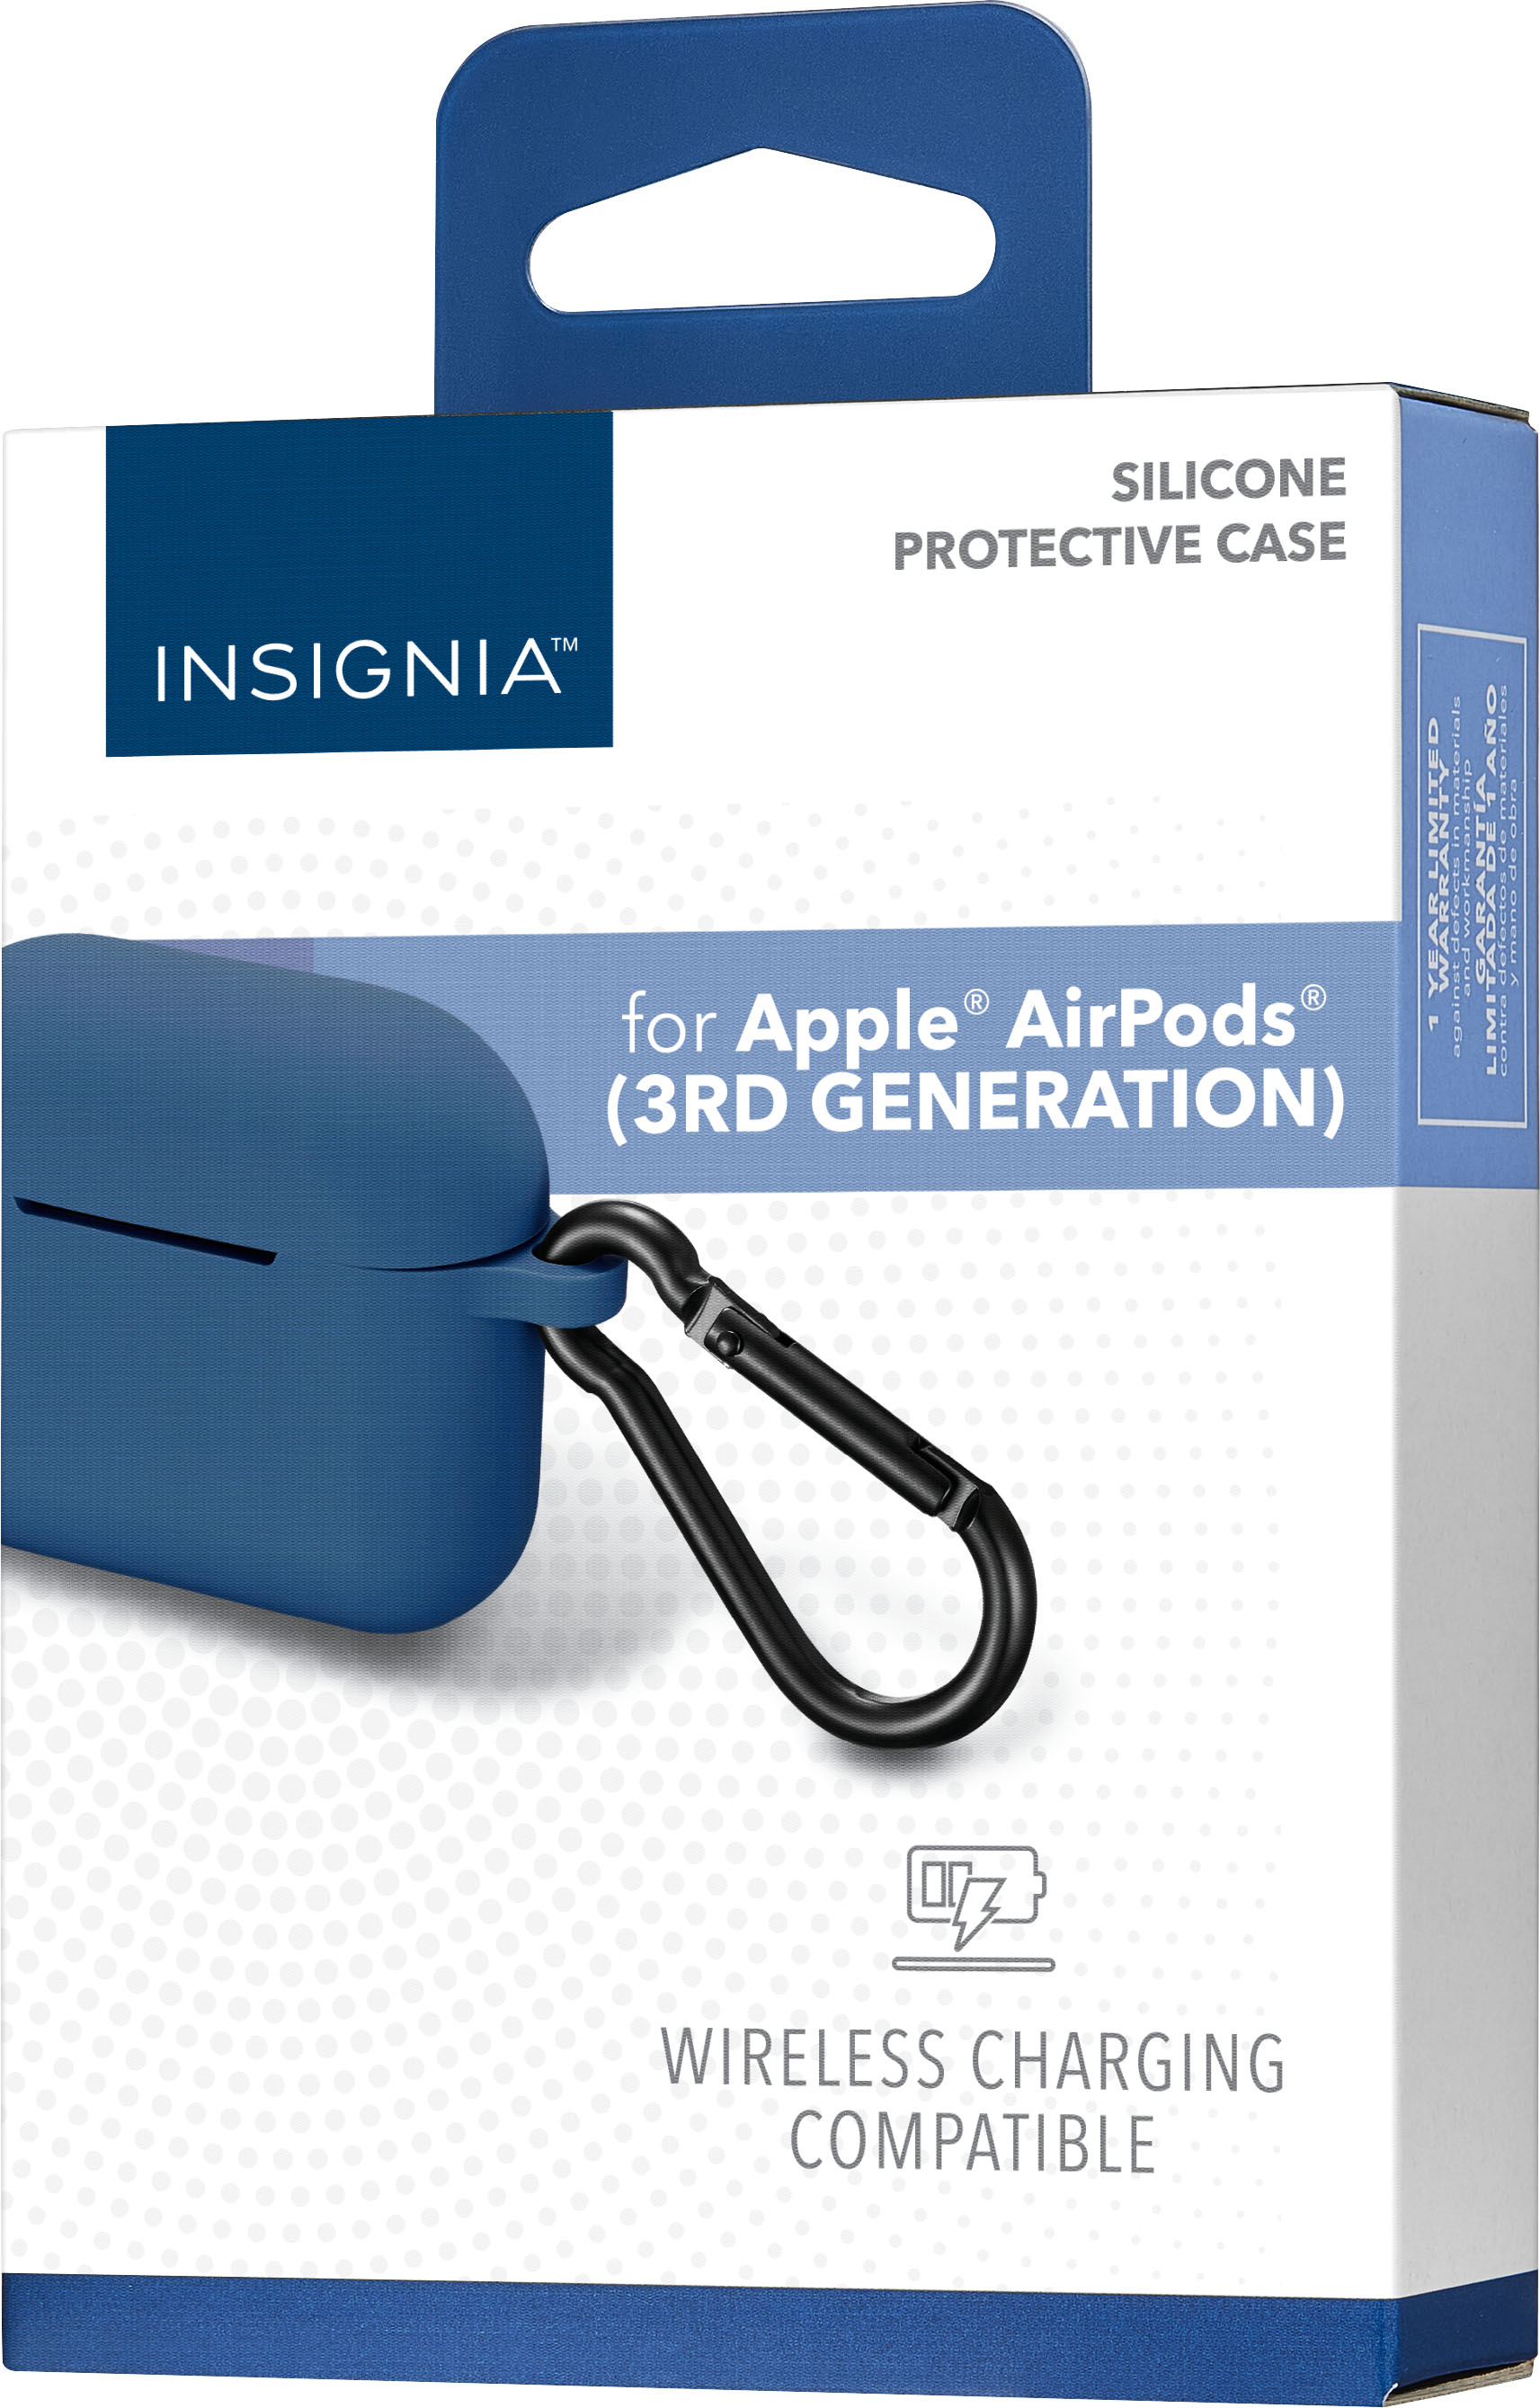 For Apple AirPods 3rd gen case cover & Clip